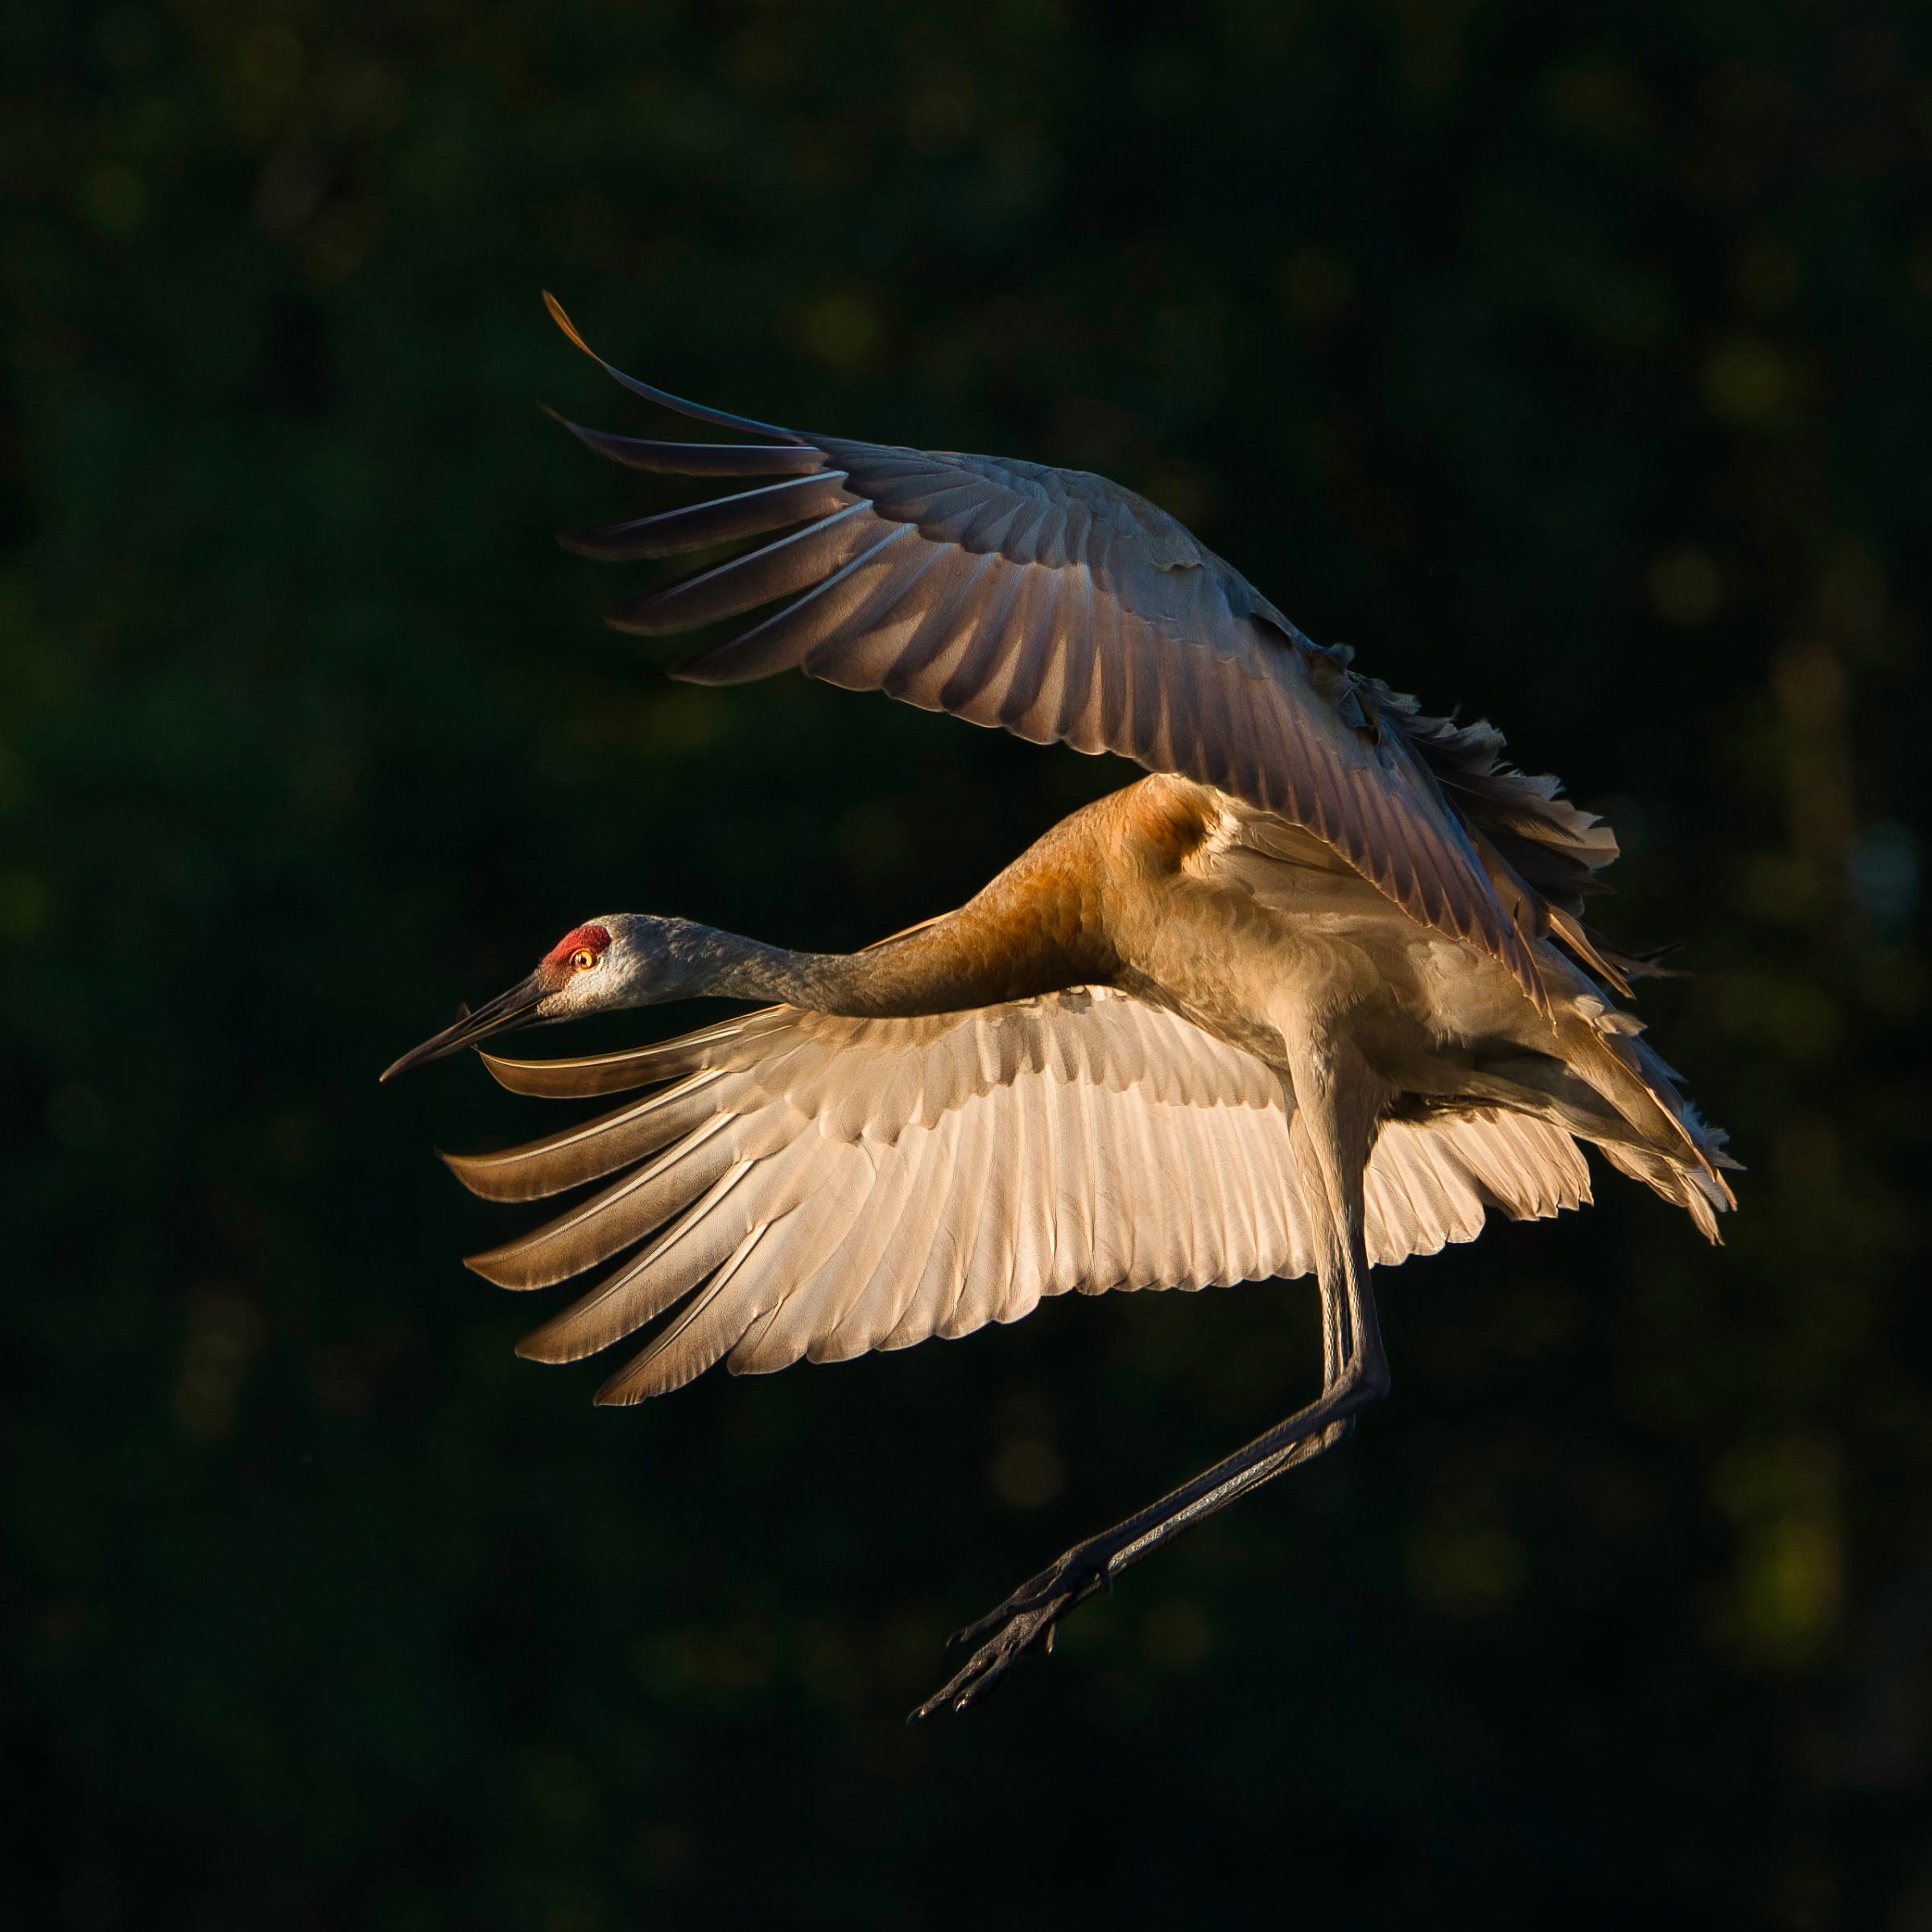 FINALIST: Fur, Feathers and Flora - Wixom photographer Dennis Boatman made excellent use of beautiful light for this stunning photo of a sandhill crane in Commerce Township.